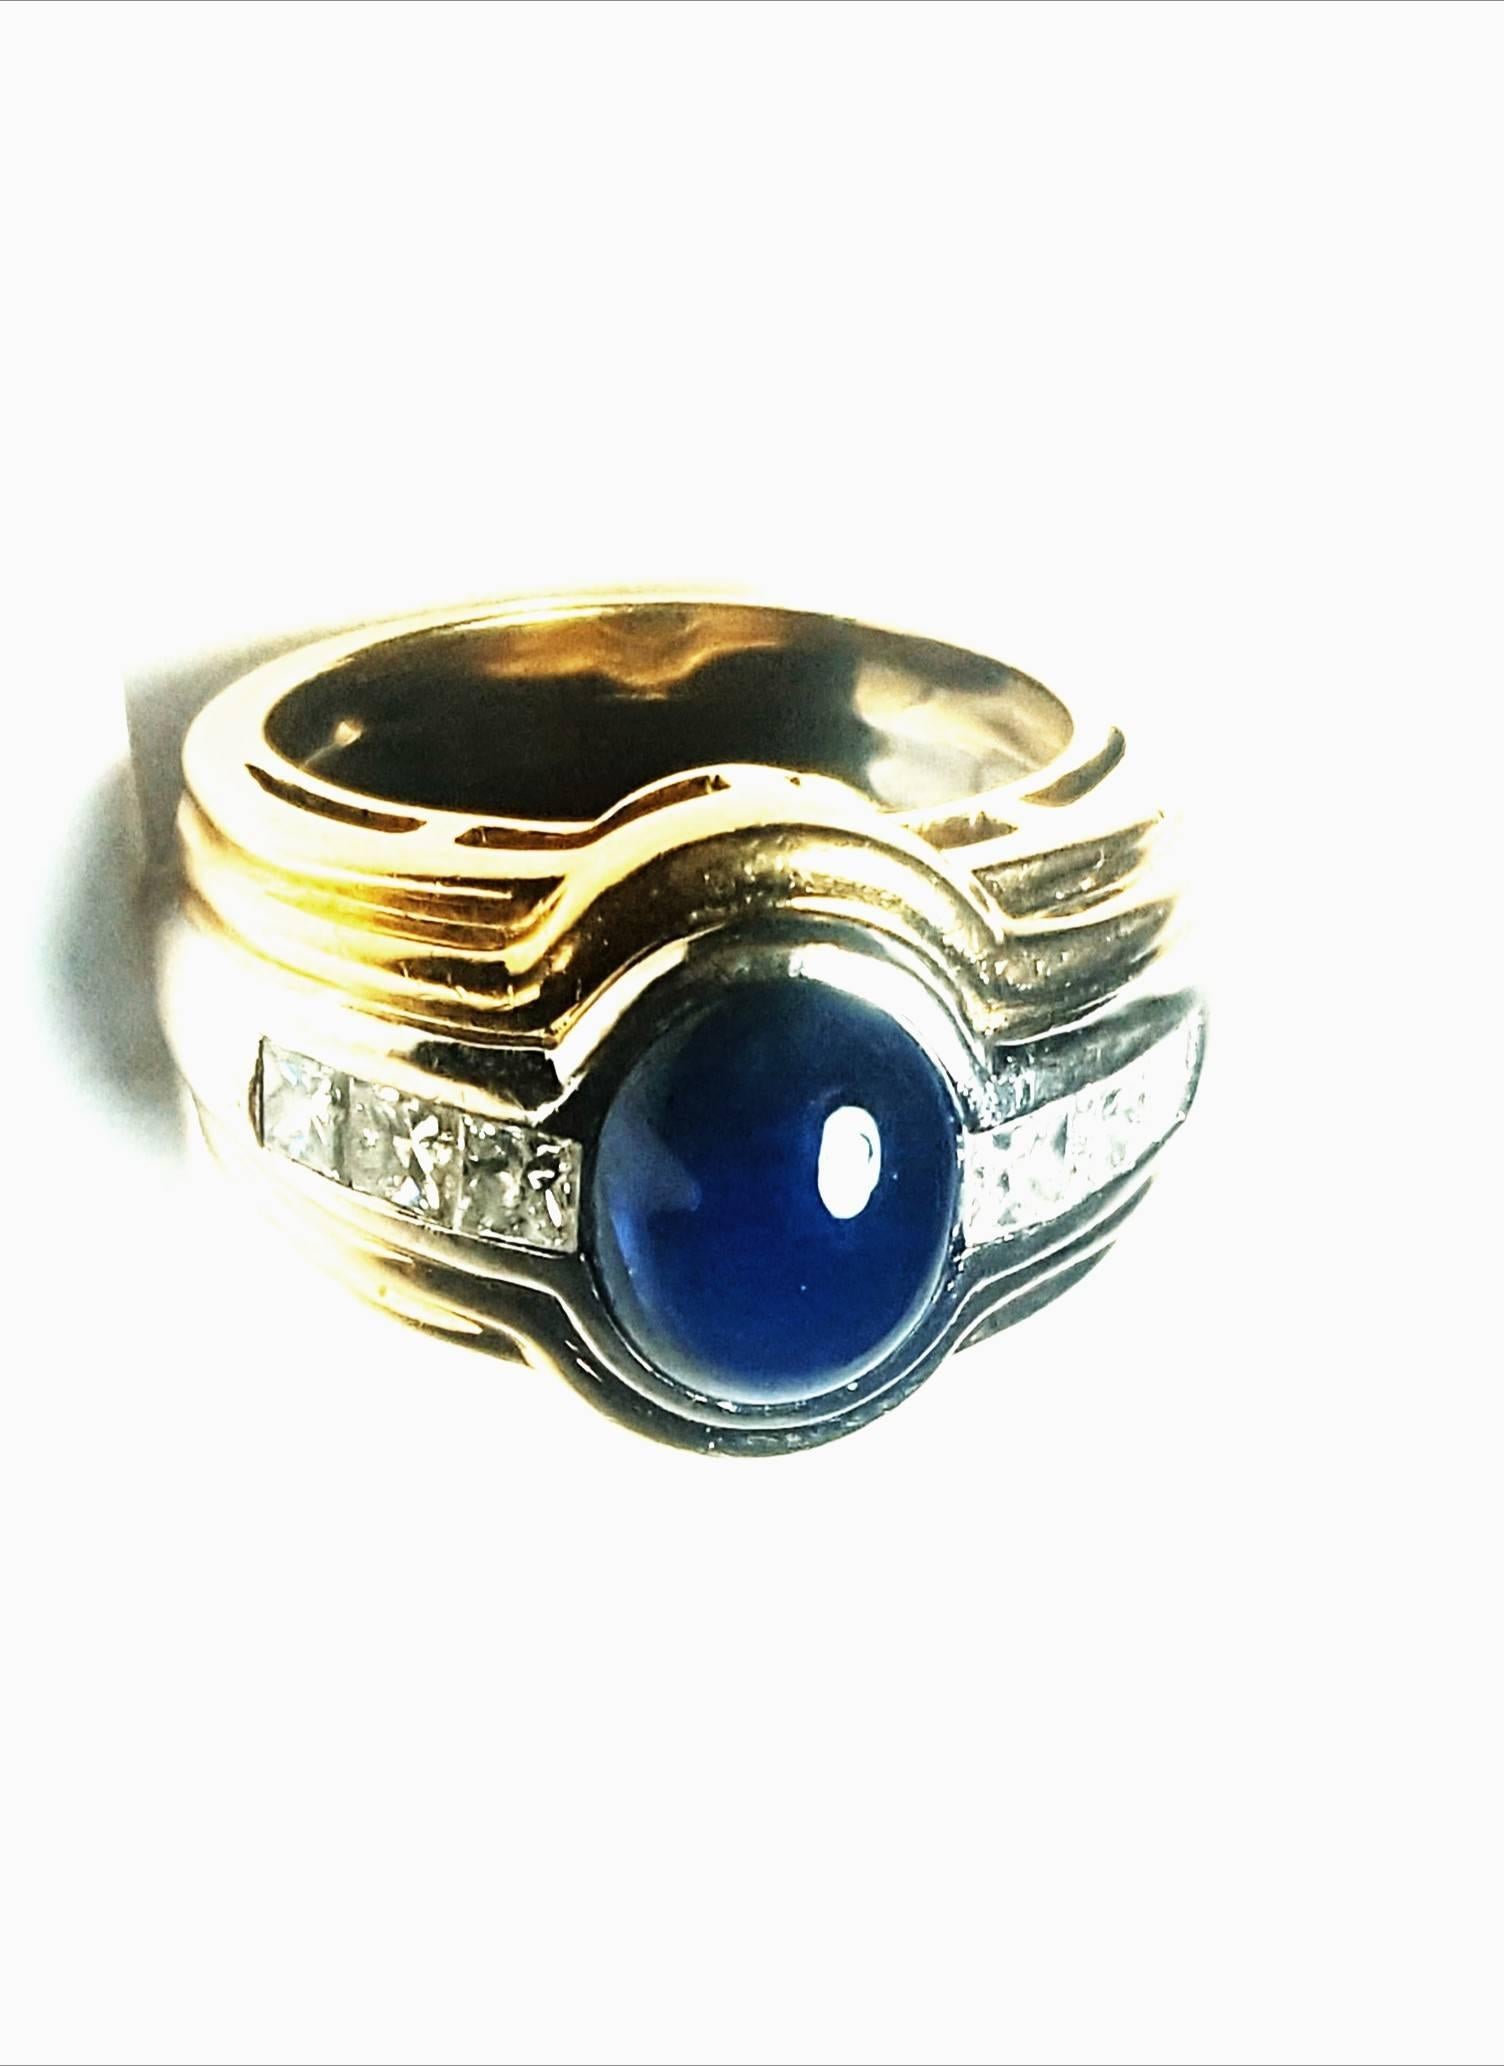 Combining precious stones with diamonds is always a winning design.  This fabulous 18 karat yellow gold ring features an oval cabochon sapphire measuring 8mm x 10mm, weighing in at 3.15 carats.  An insert of 18 karat white gold, in the center of the